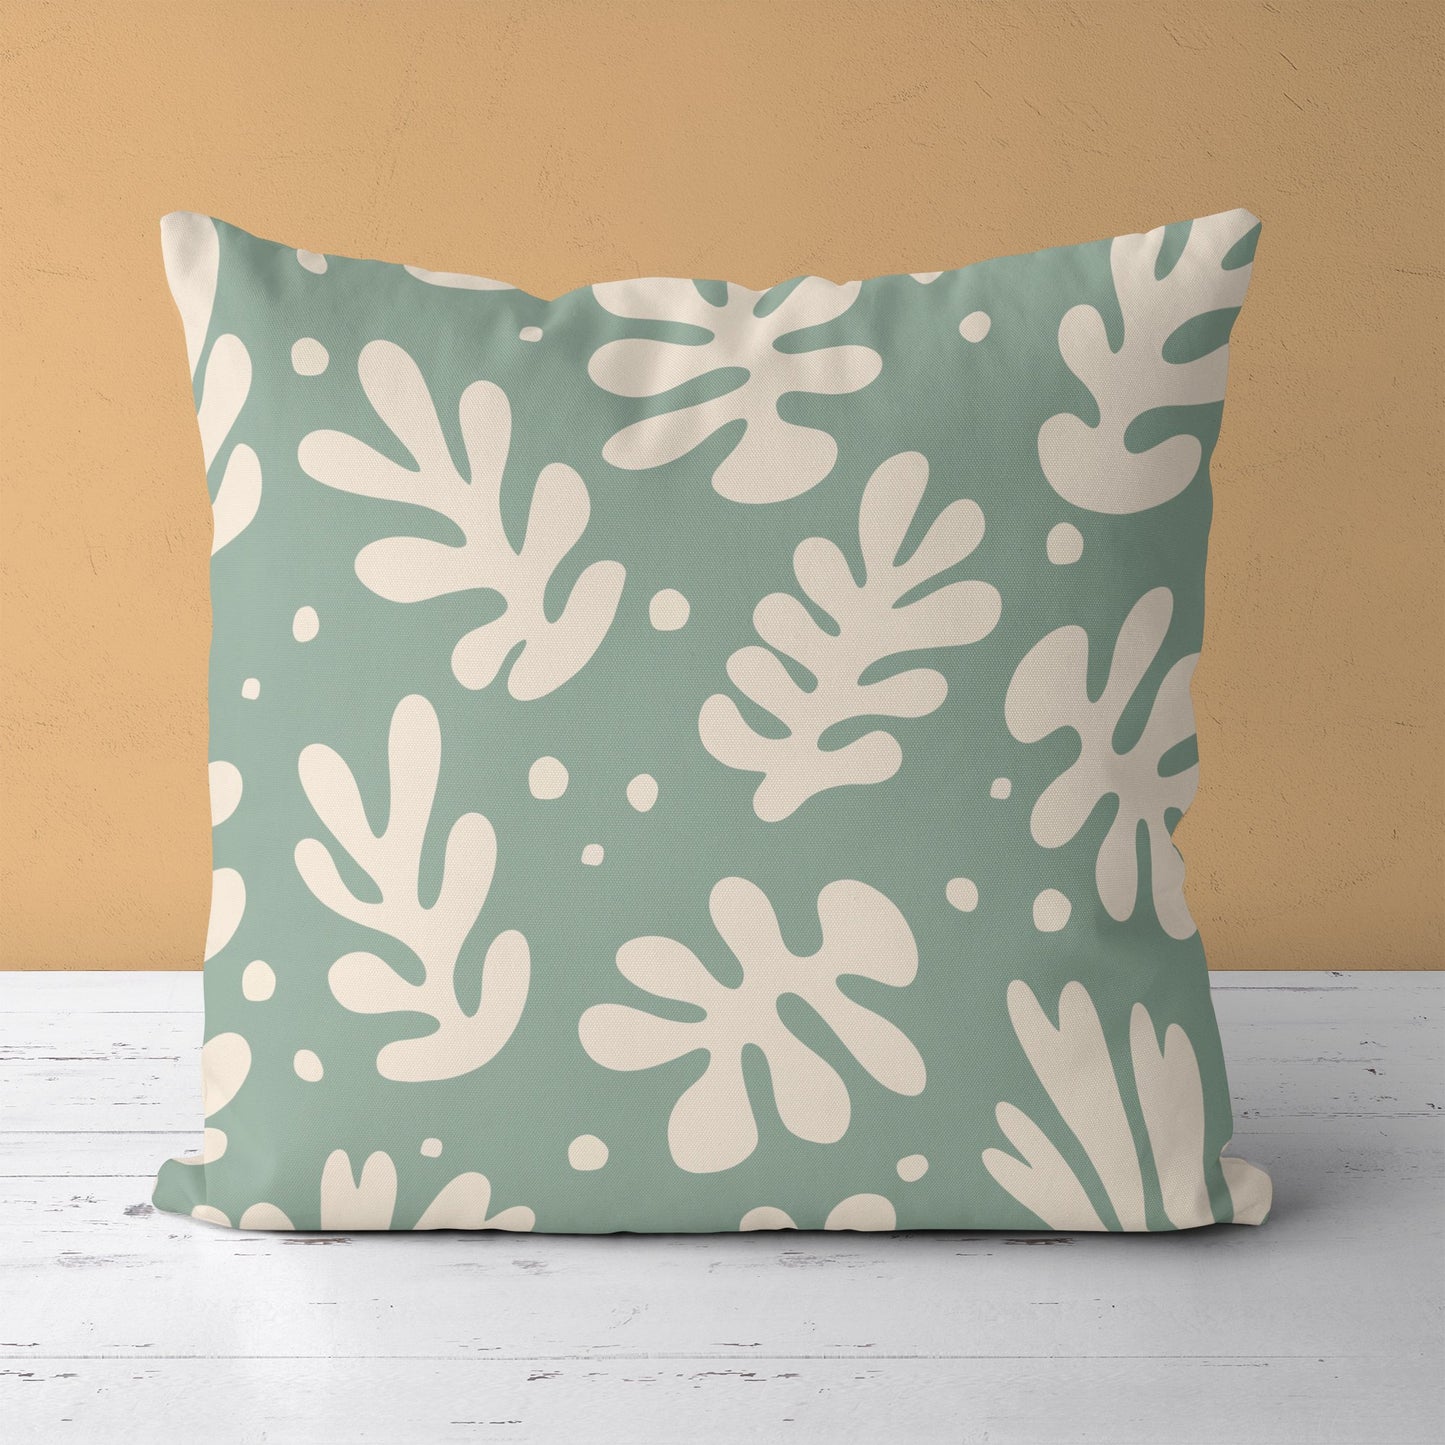 Pillow with Cut Outs Leaves